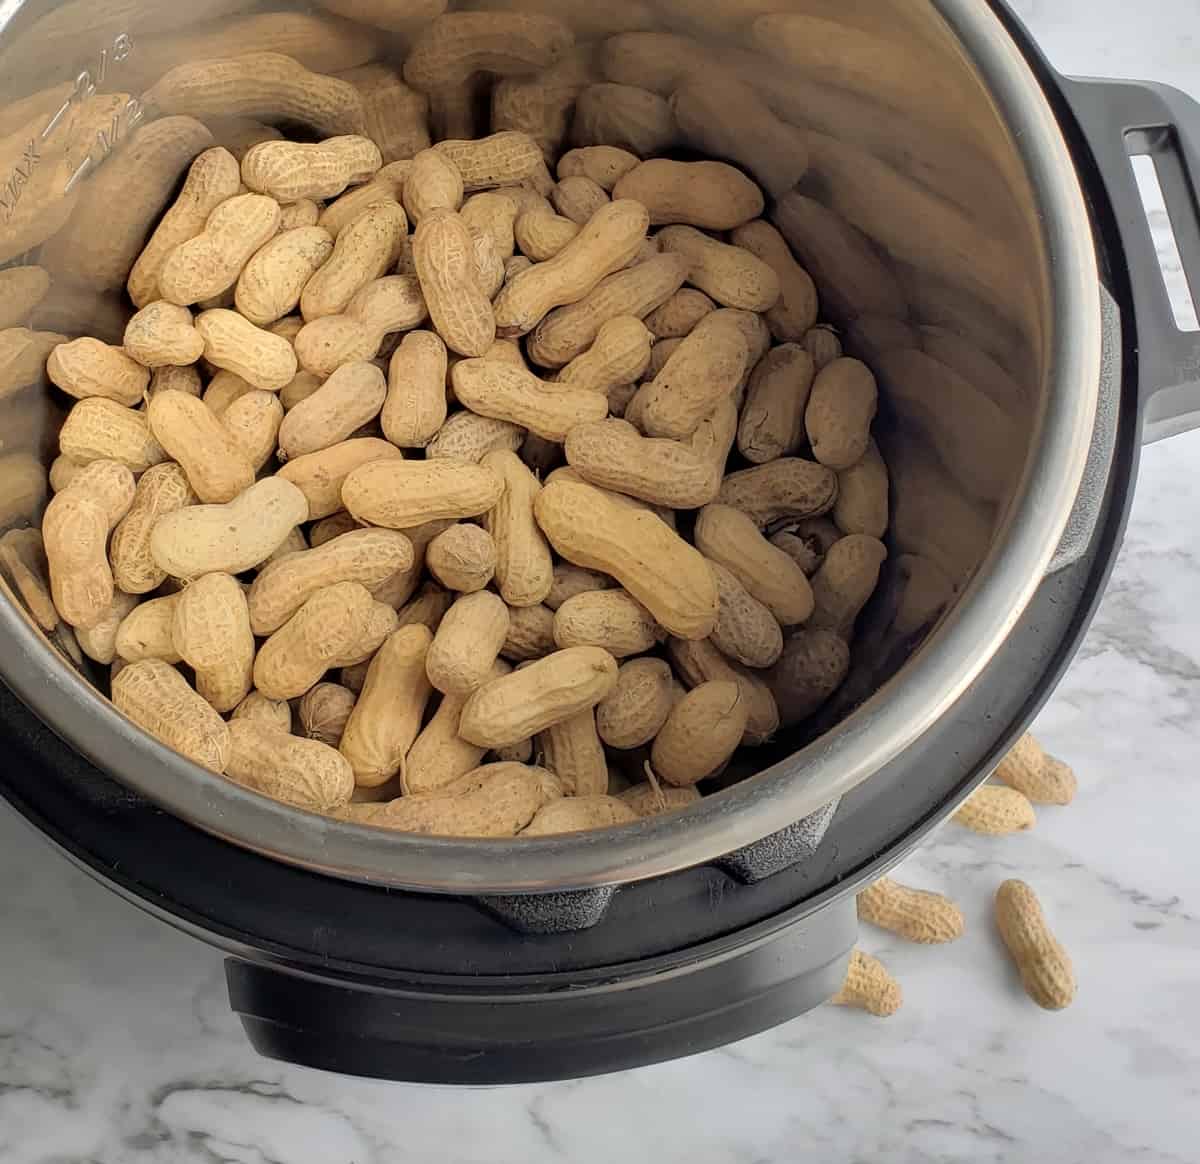 Peanuts in the shell inside an Instant Pot